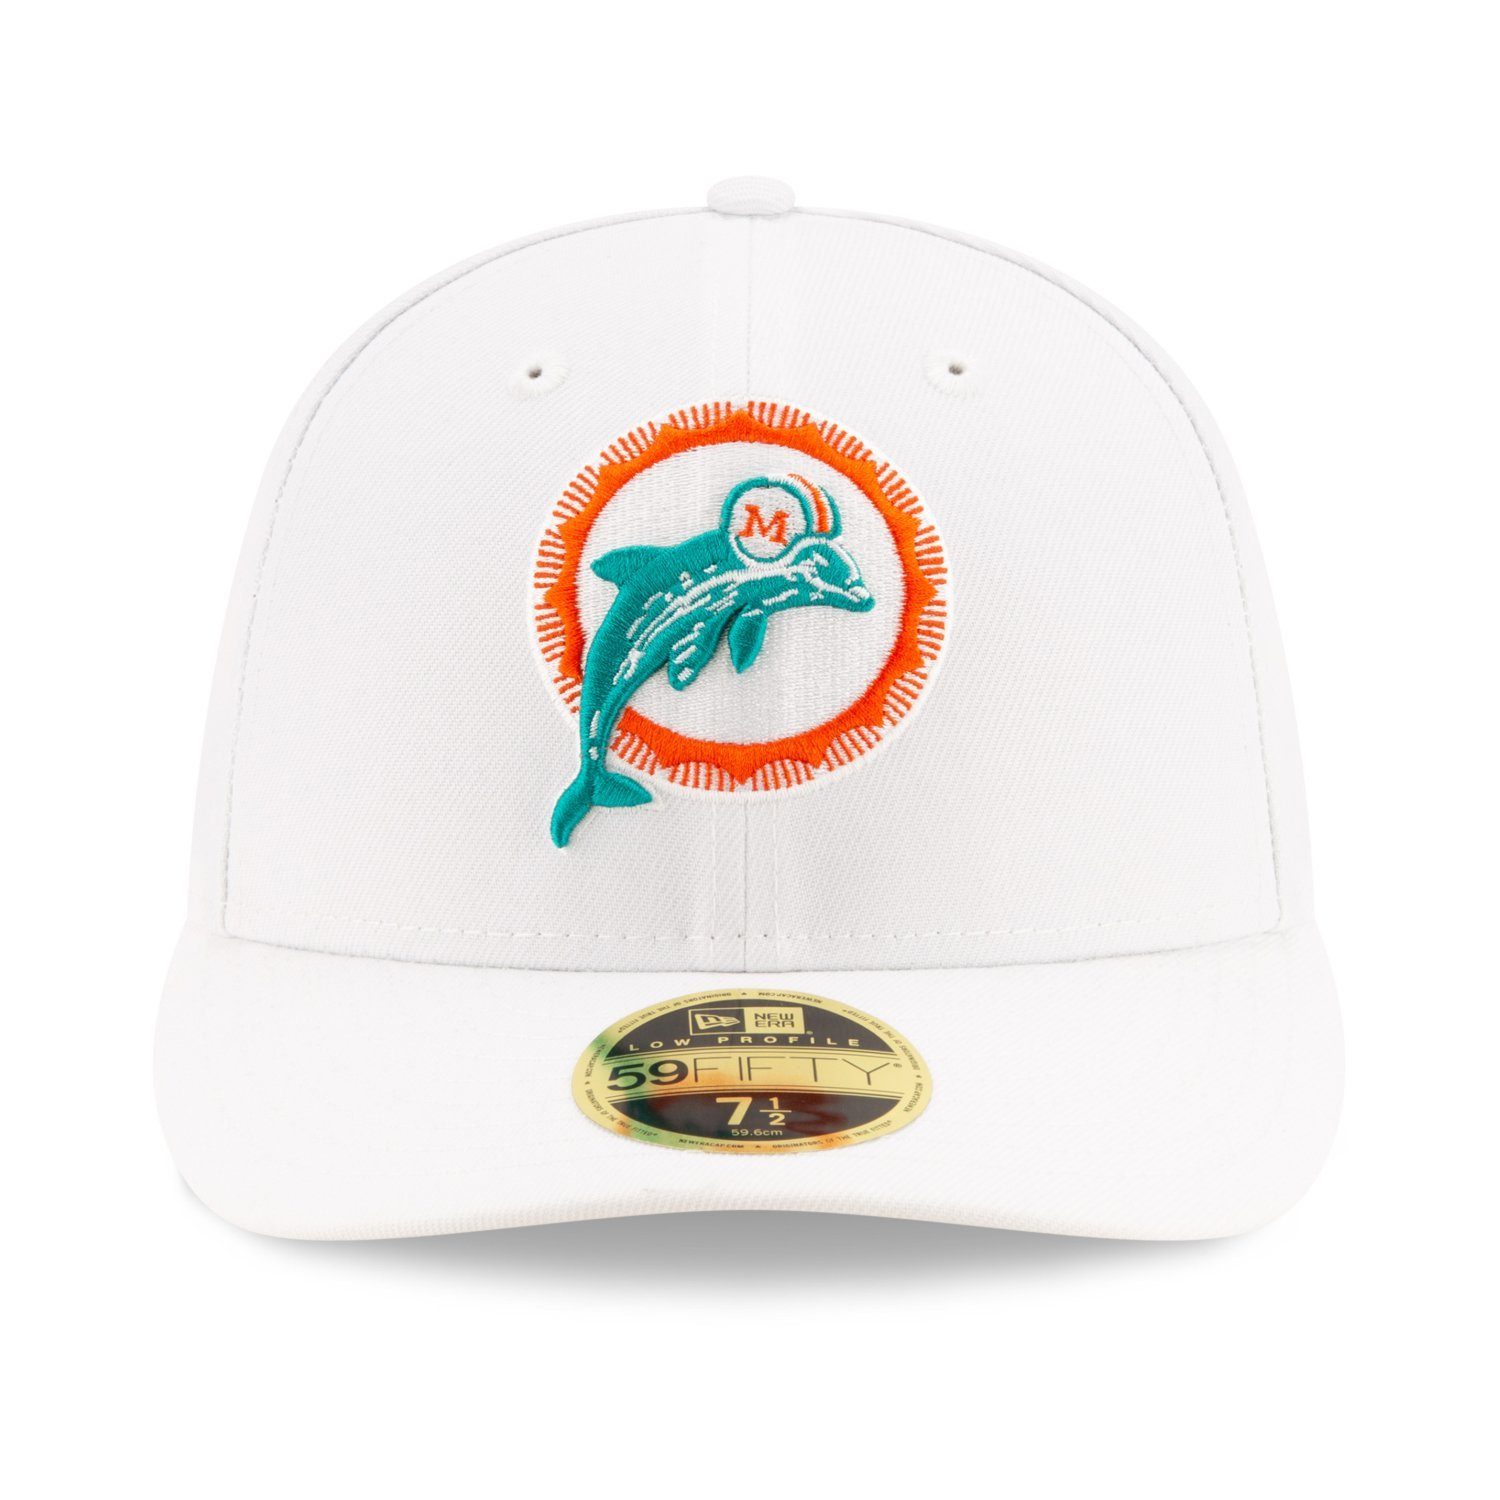 New Era Low Profile RETRO 59Fifty Fitted Miami Dolphins Cap